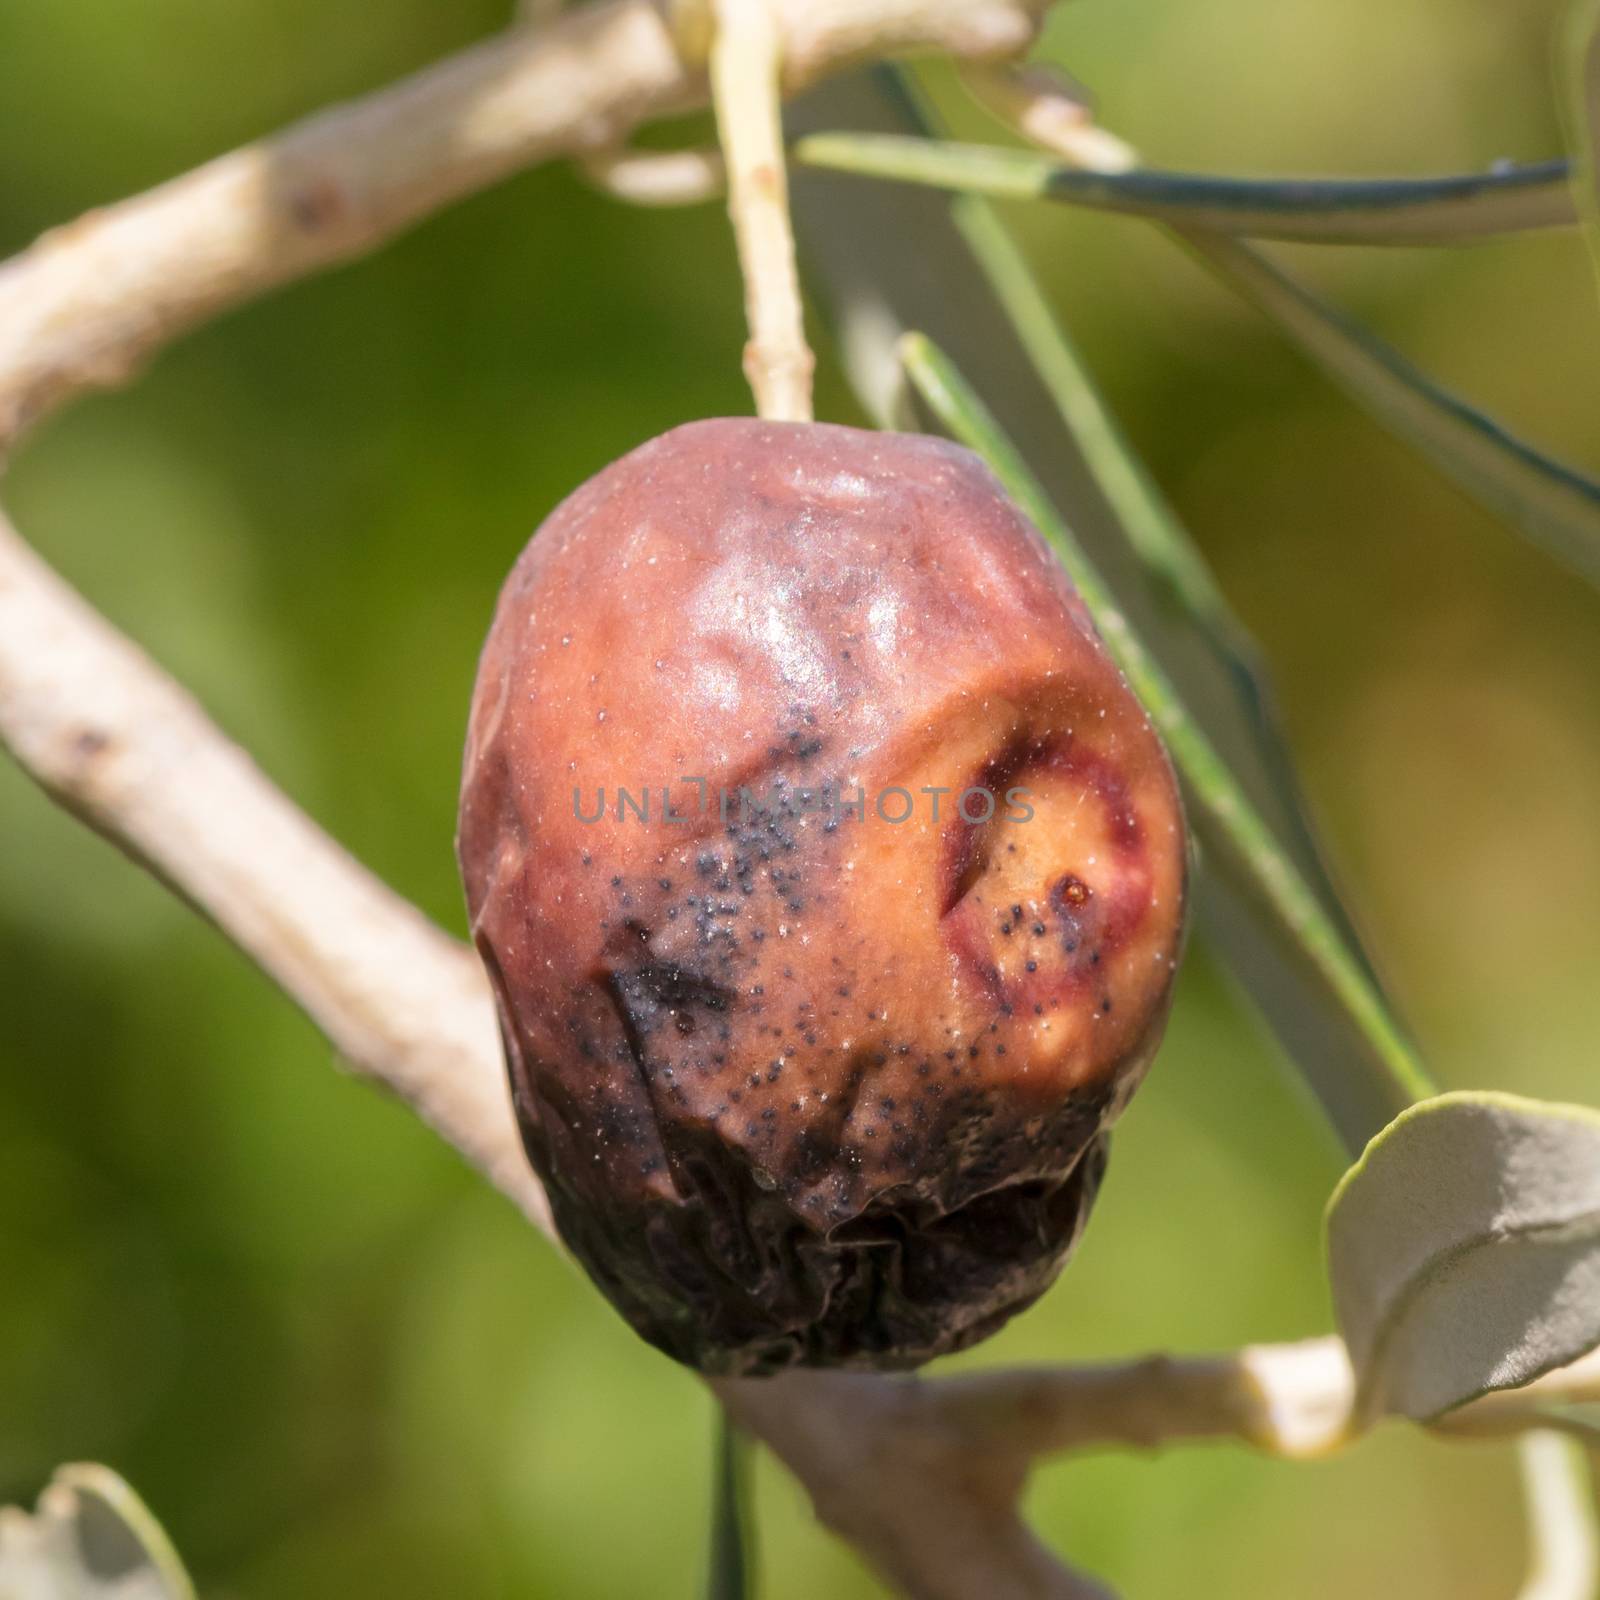 Olive gone bad in a tree - Private garden in Greece